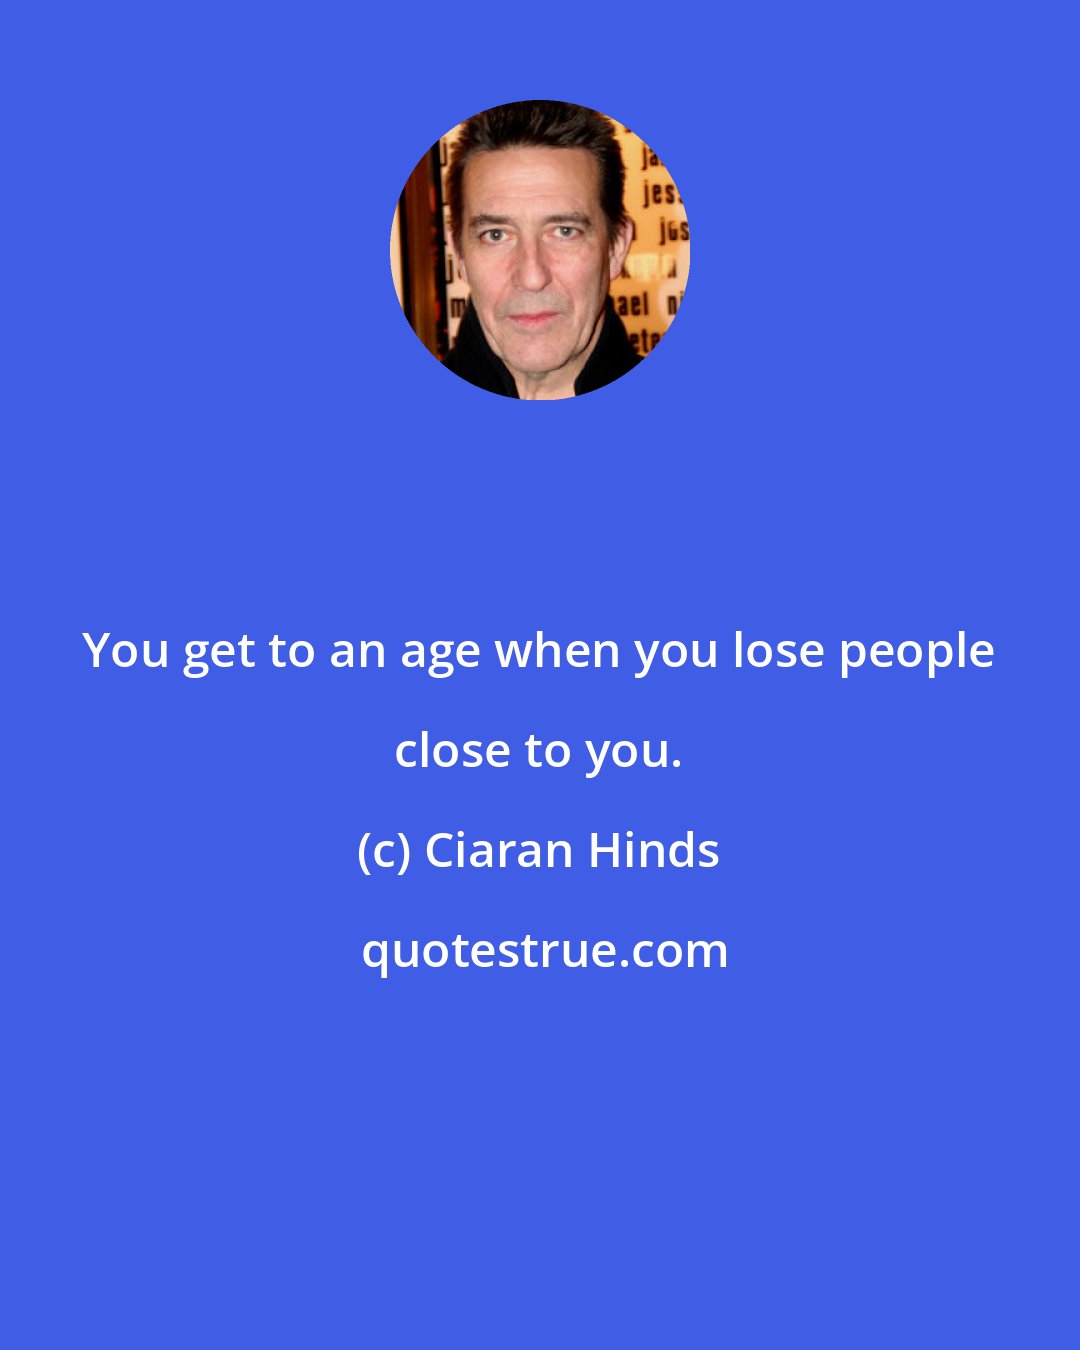 Ciaran Hinds: You get to an age when you lose people close to you.